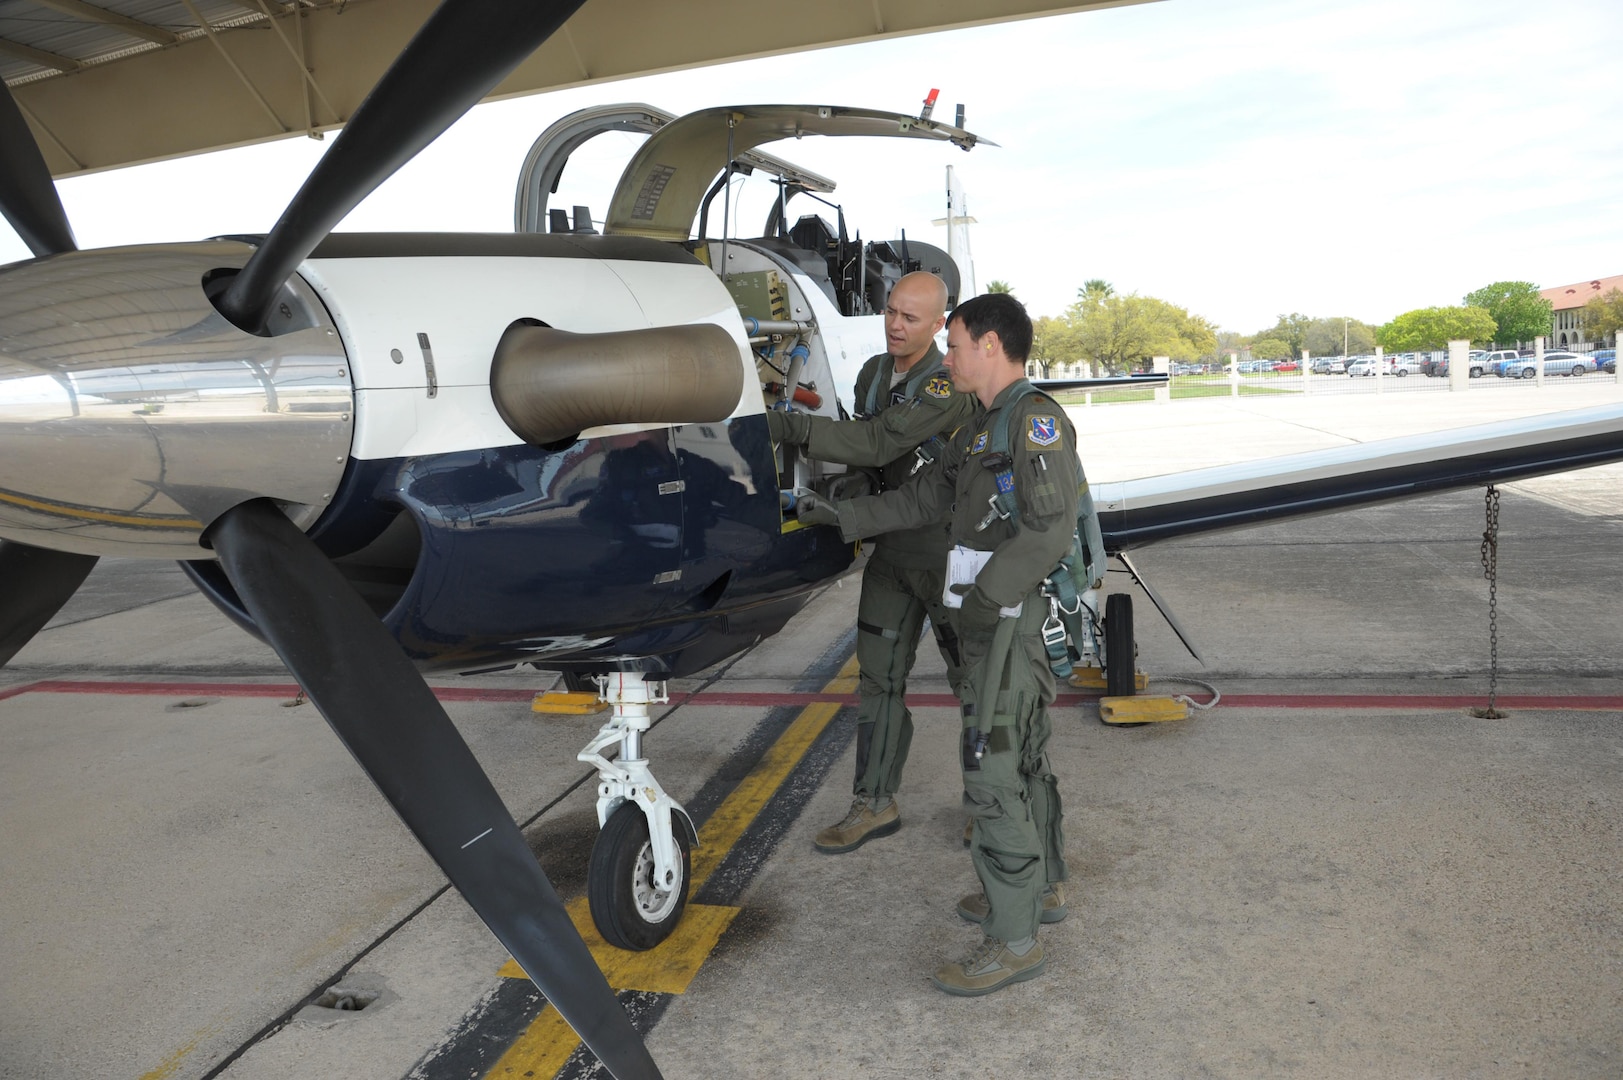 Capt. Dave Markus (left), 559th Flying Training Squadron flight instructor, and Maj. Neil Gregory, 559th FTS student, perform a pre-flight inspection, before their flight March 26 at Joint Base San Antonio-Randolph. (U.S. Air Force photo by Joel Martinez)